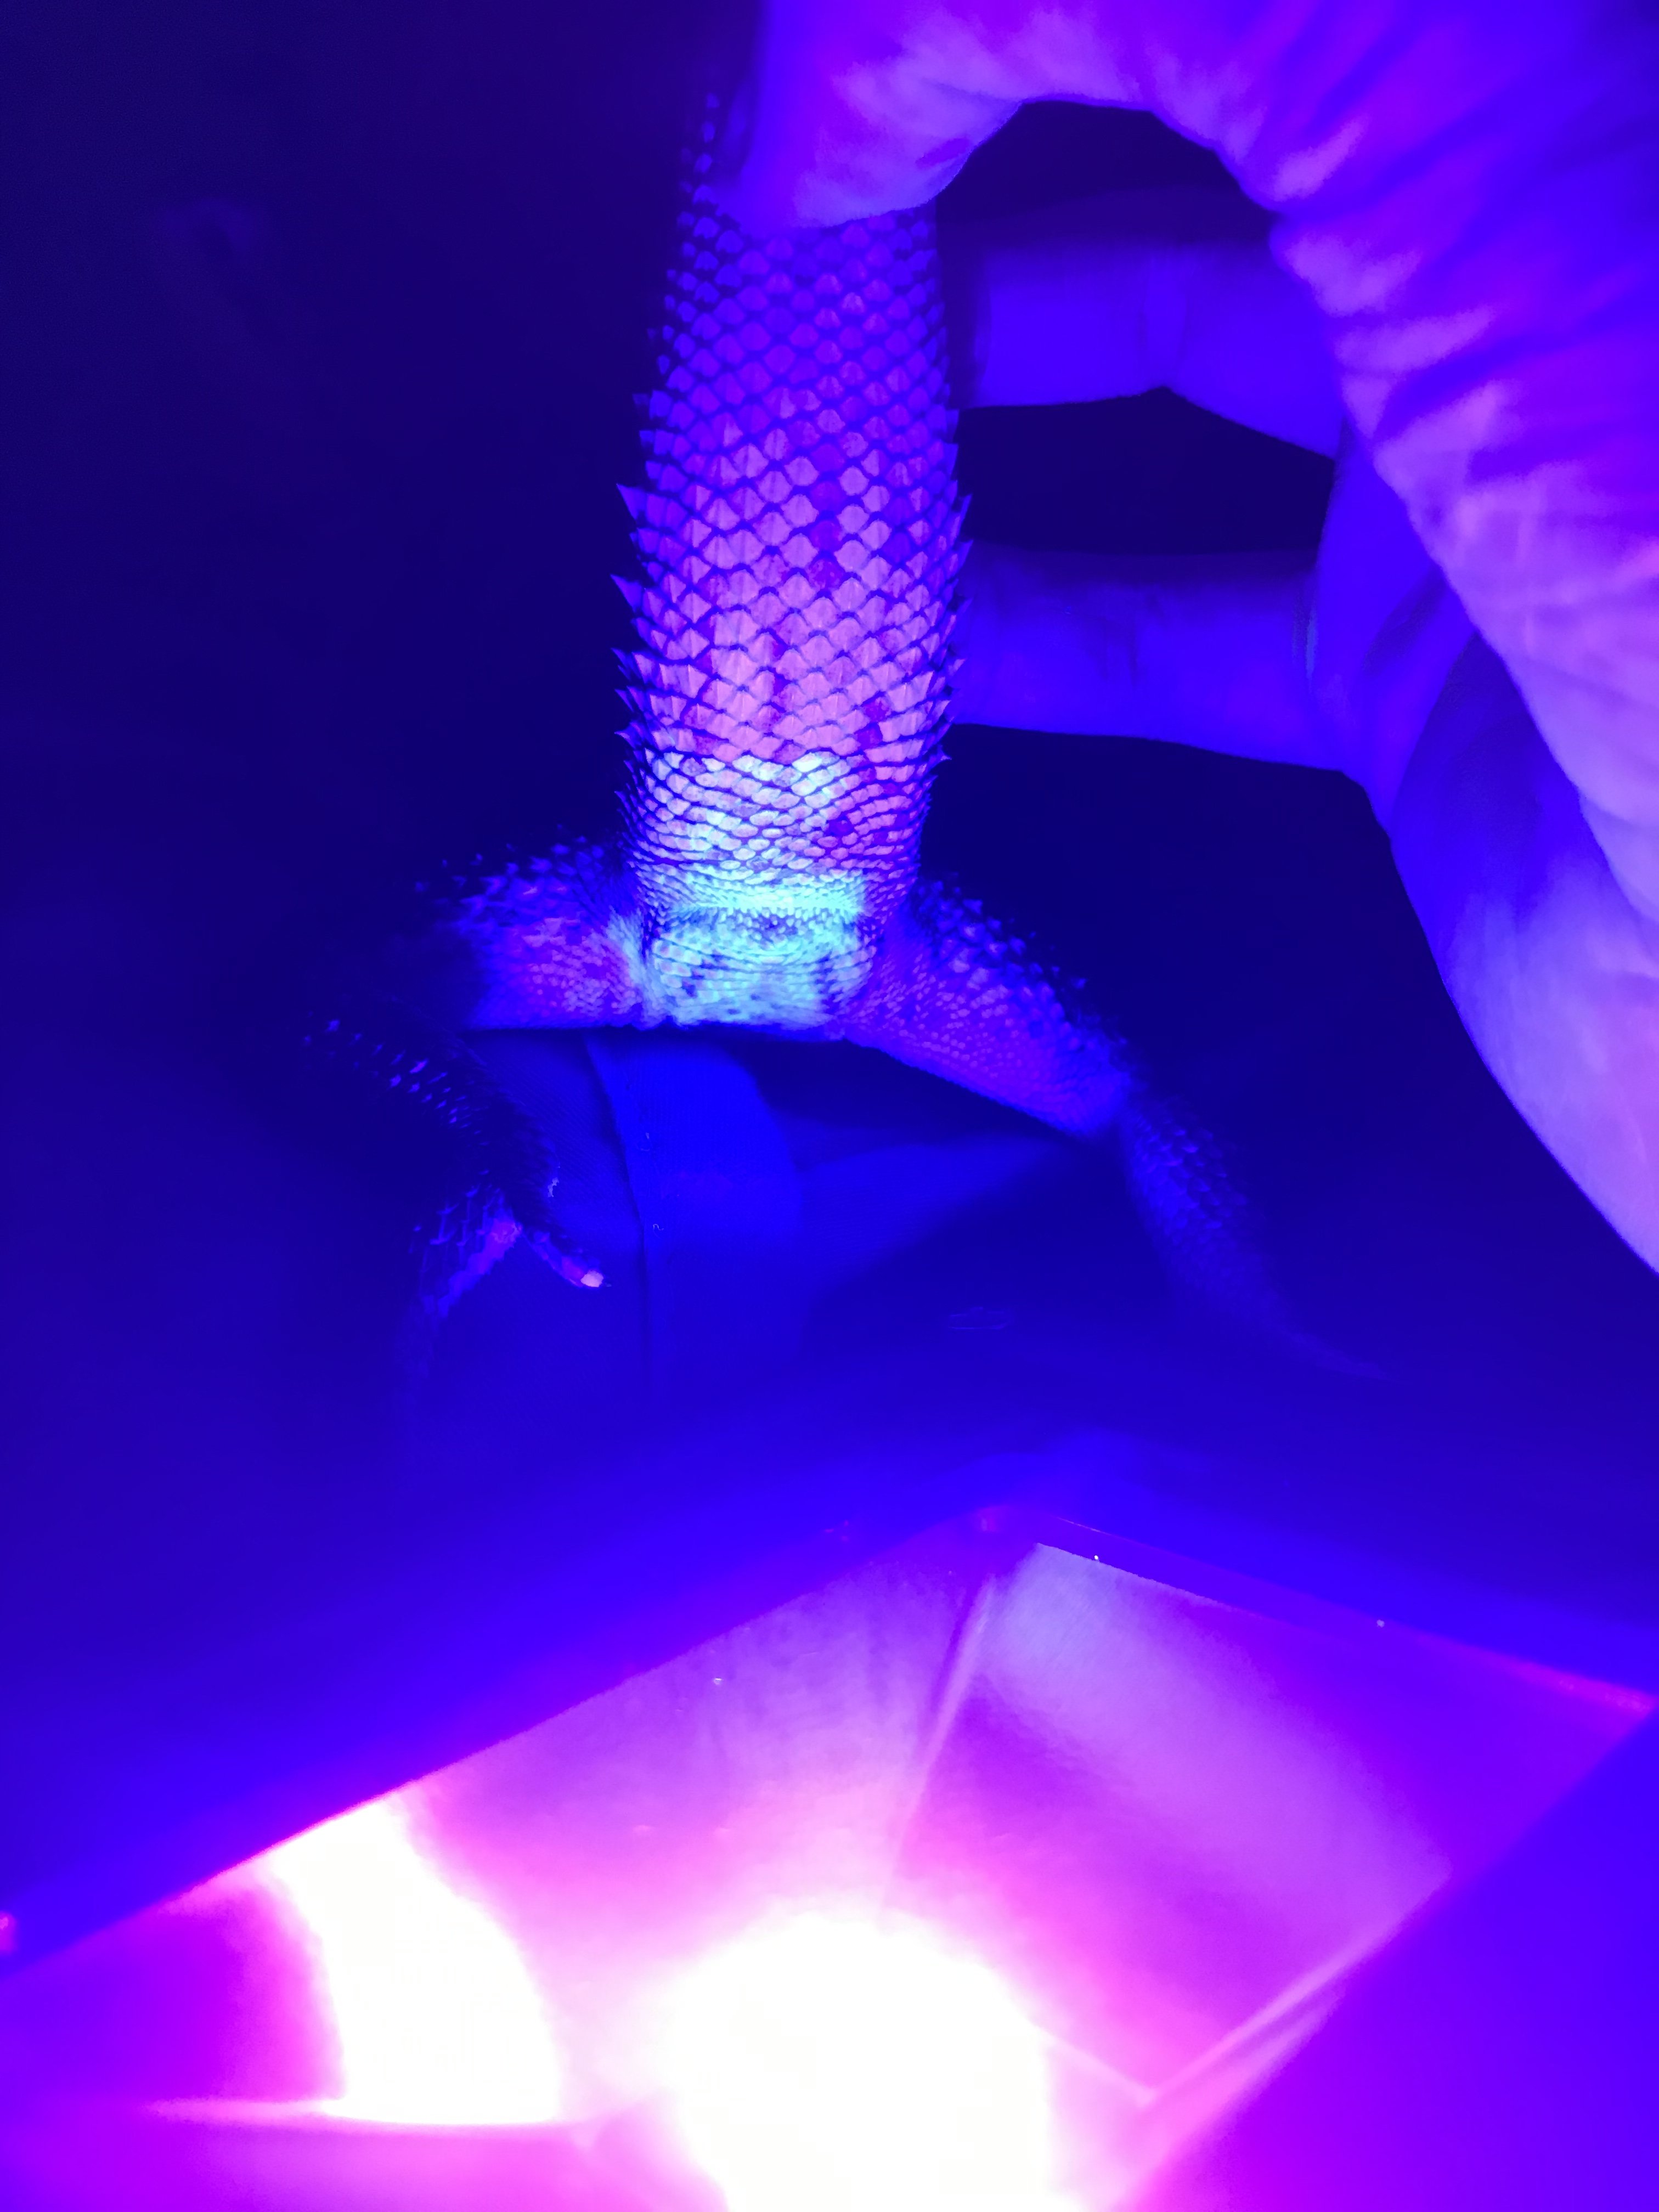 Male or female? I used a black light that I found in my closet last week, let me know ASAP